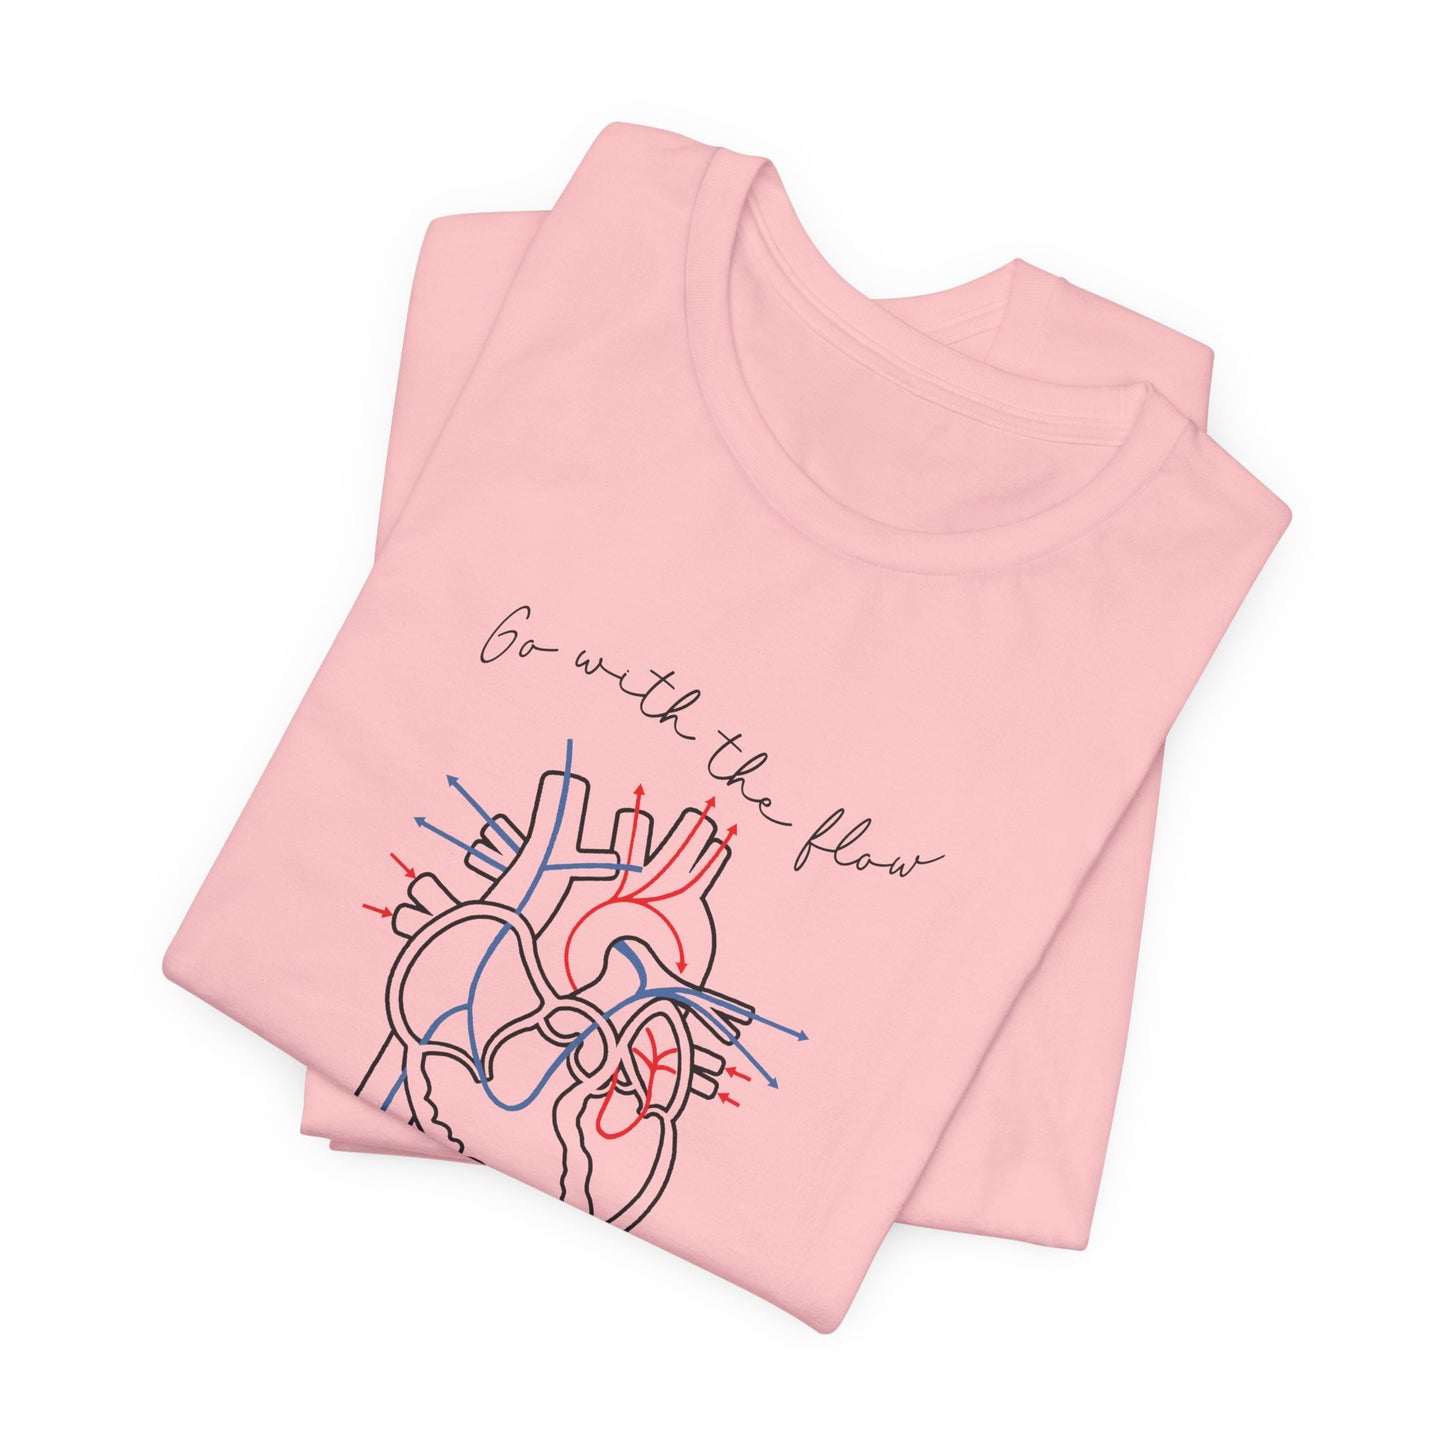 Go with the Flow Heart T-Shirt